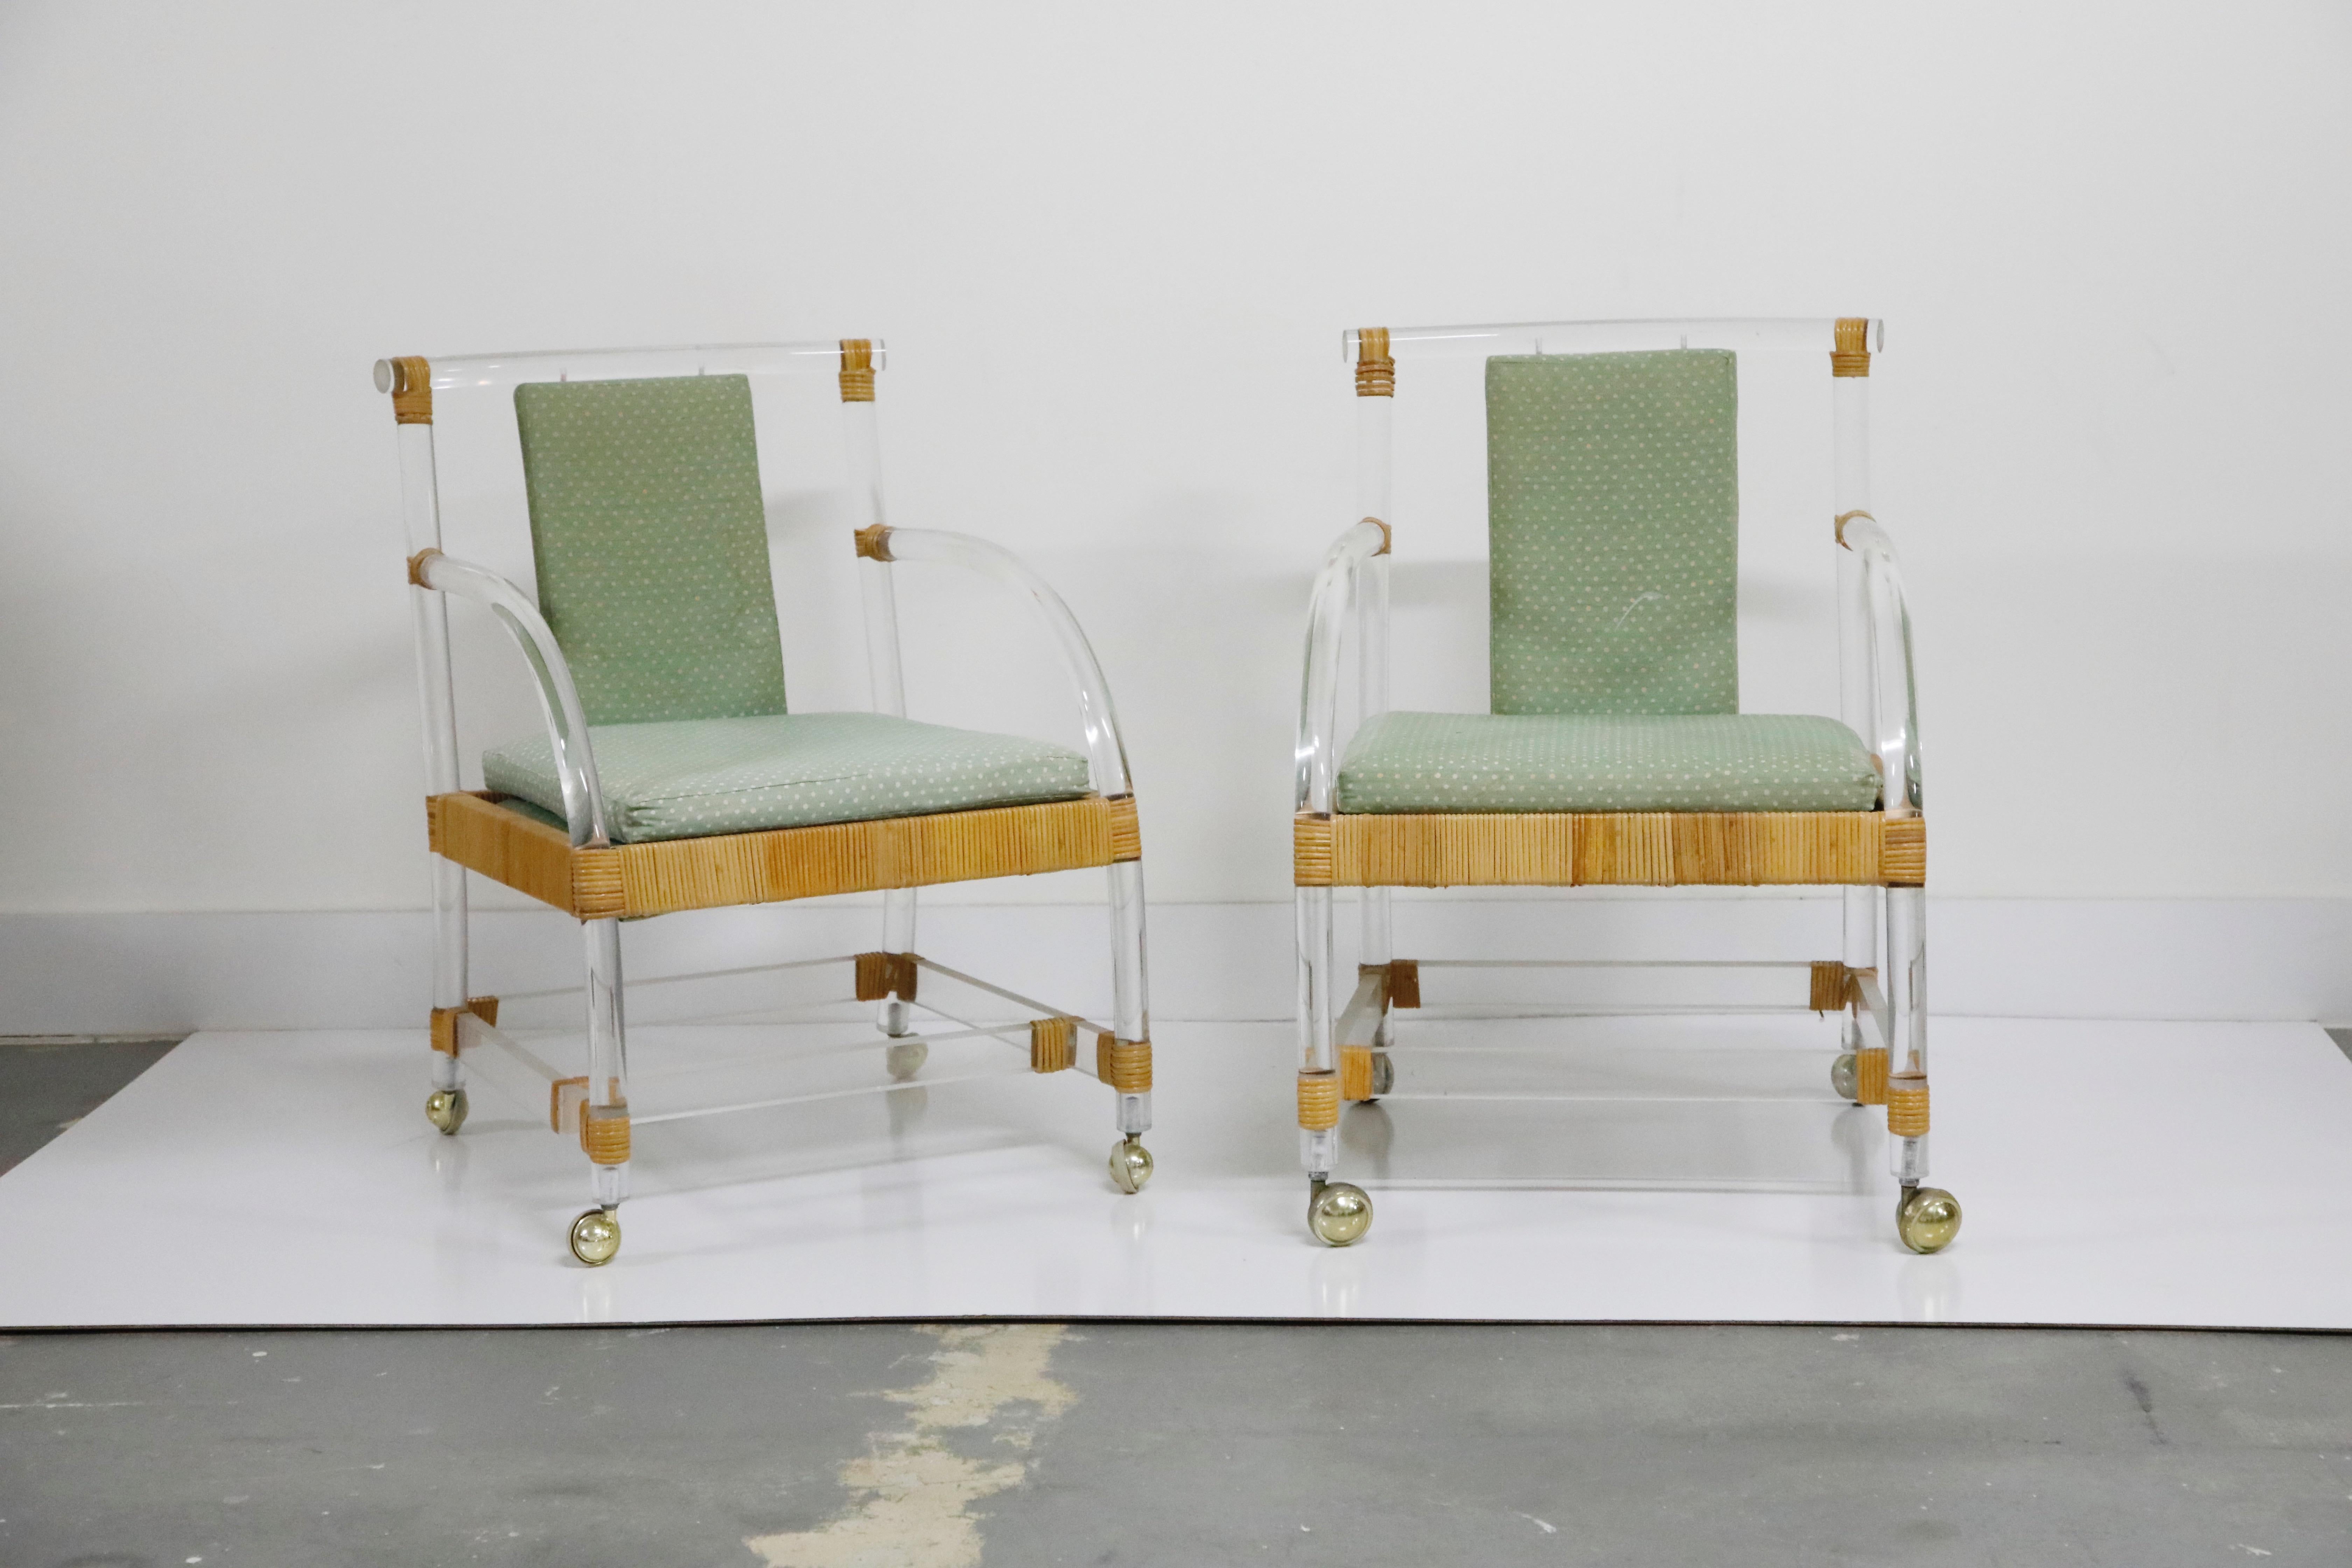 An extremely stylish and on-trend pair of lounge armchairs constructed from Lucite and rattan on top of casters by Ficks Reed, circa 1970s. This pair of laid-back armchairs would work excellent with an interior designer who is looking to combine the